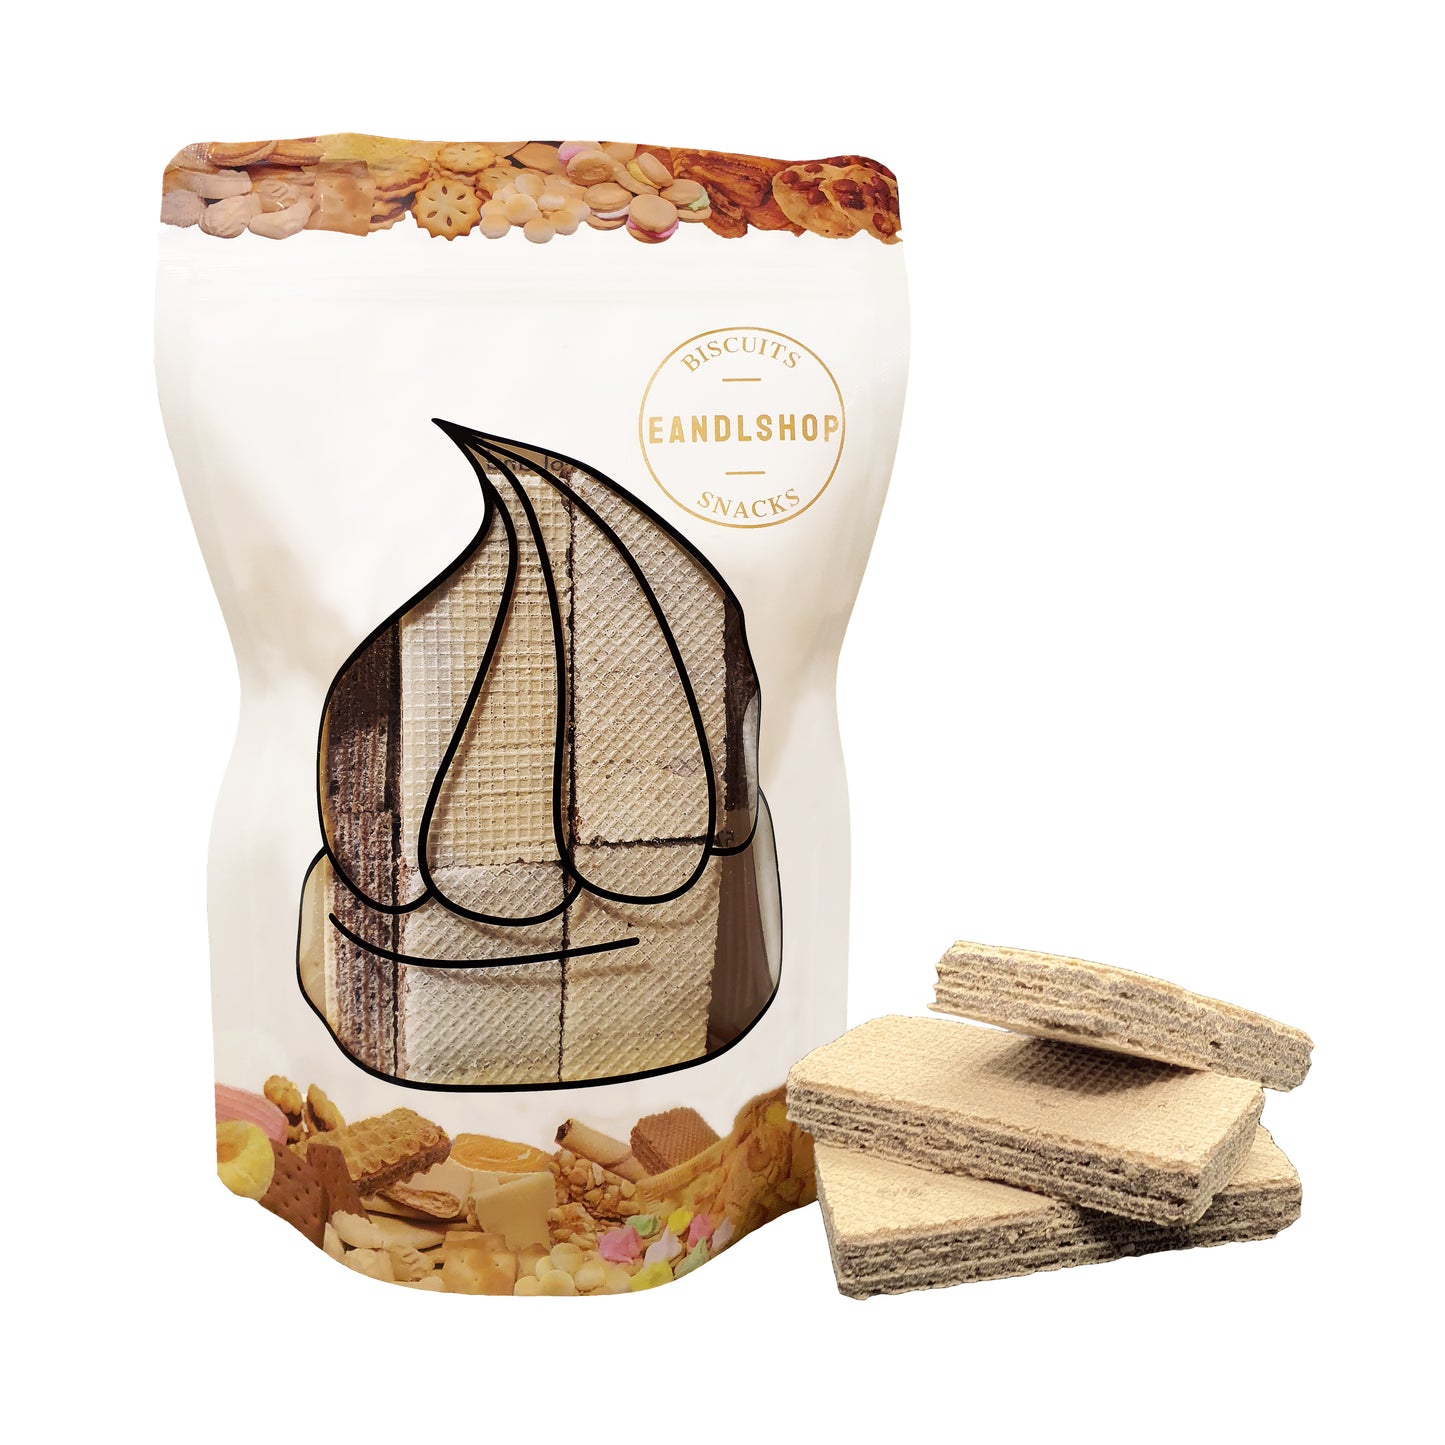 Chocolate Wafer. Old-school biscuits, modern snacks (chips, crackers), cakes, gummies, plums, dried fruits, nuts, herbal tea – available at www.EANDLSHOP.com